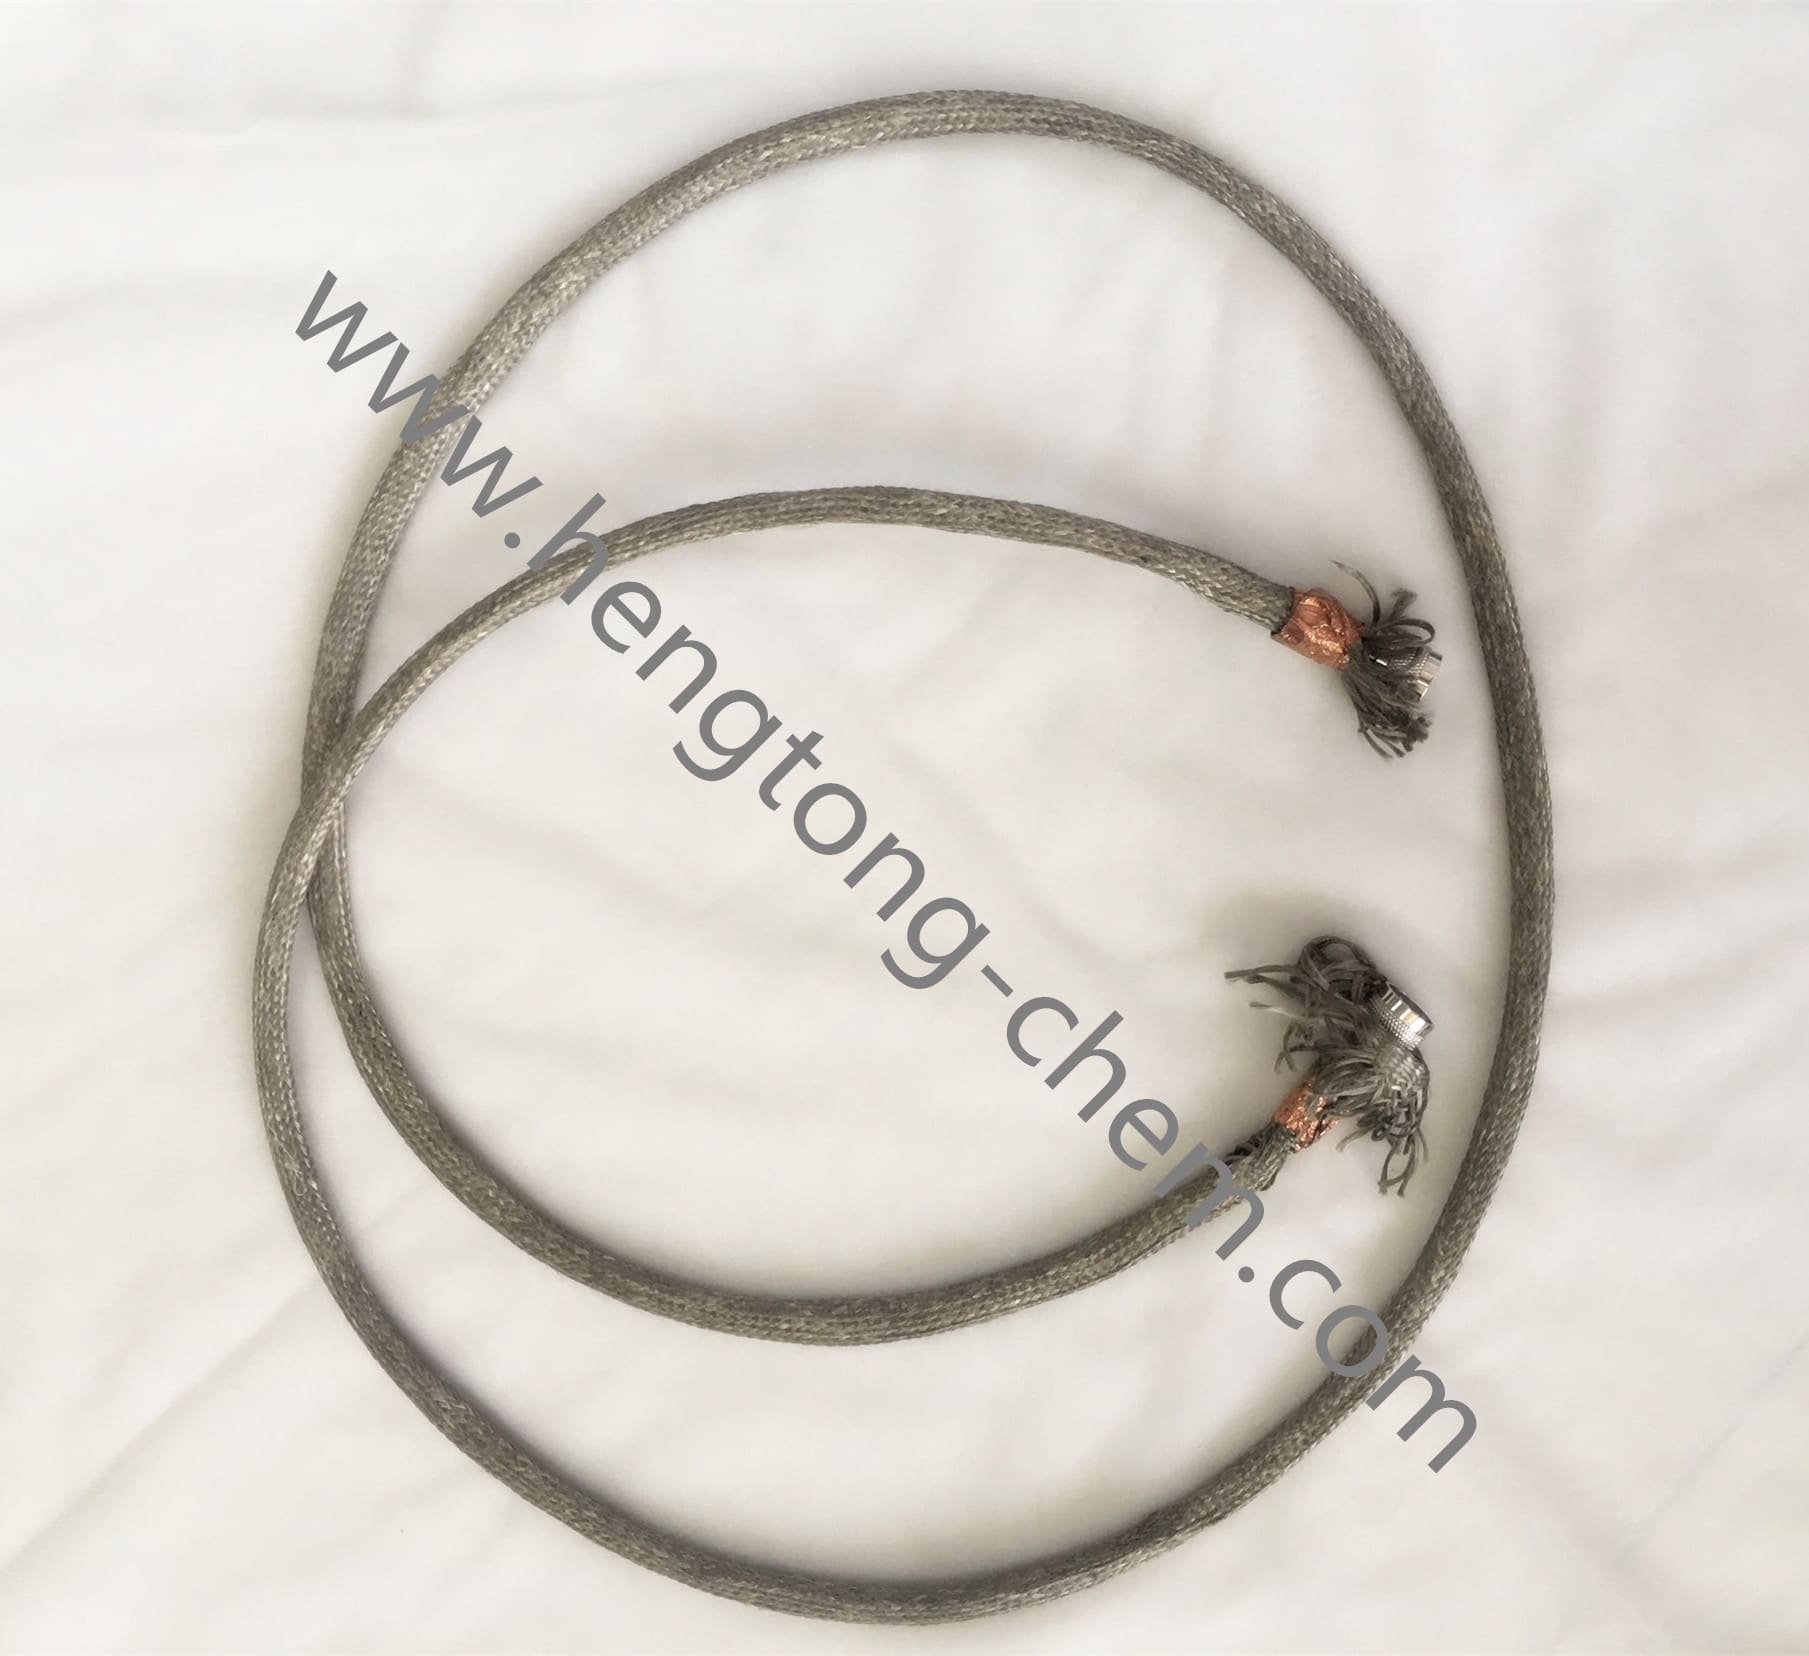 Magnetic permeability fiber anti-wave sleeve (microwave cable power frequency and RF full protection